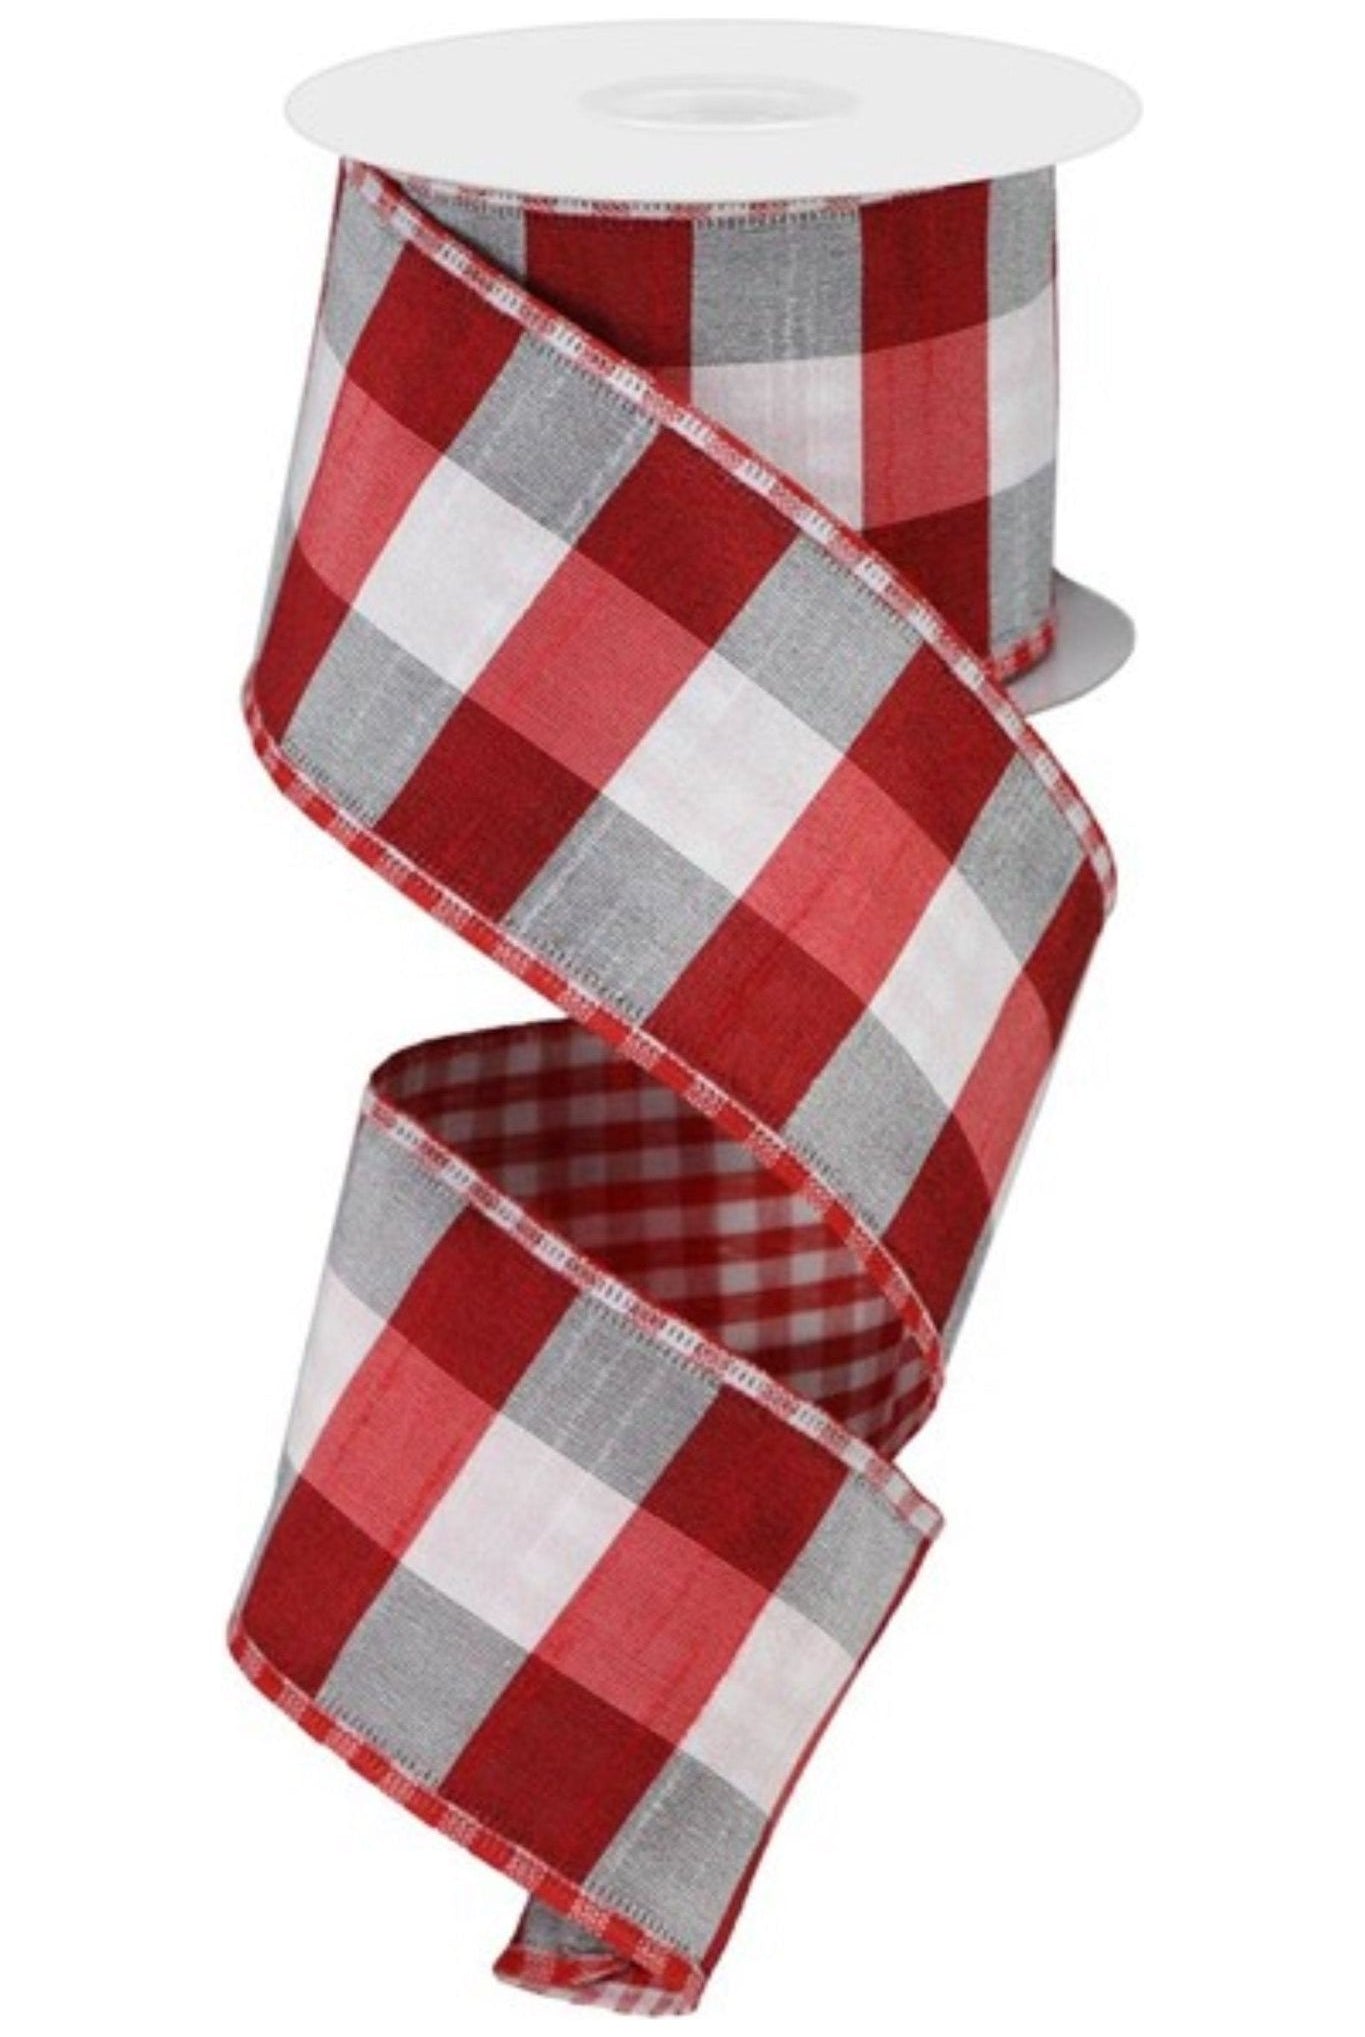 Shop For 2.5" Large Check Ribbon: Red & White (10 Yards) RG0846824